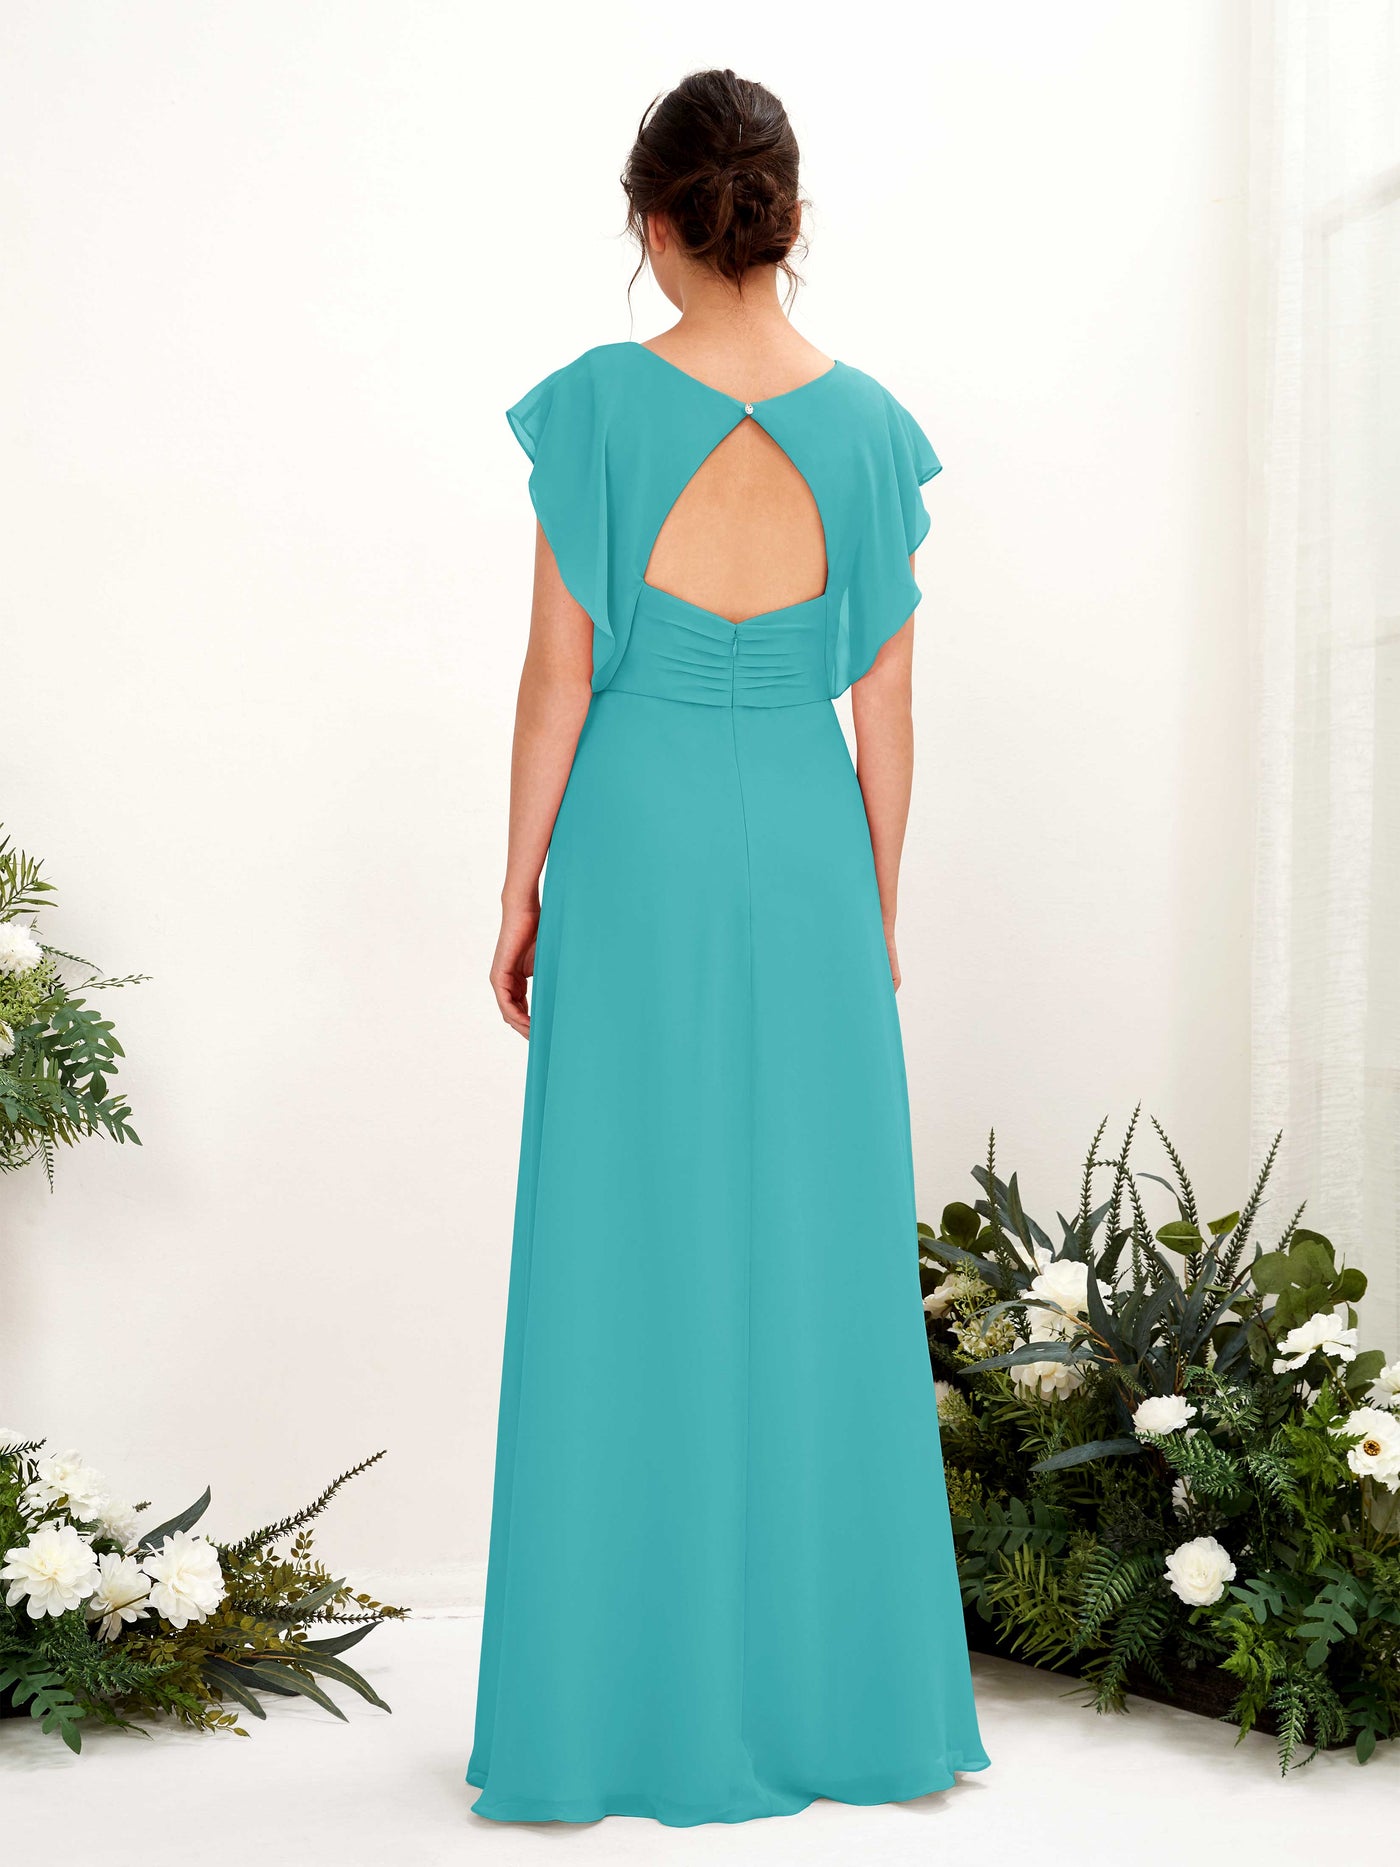 Turquoise Bridesmaid Dresses Bridesmaid Dress A-line Chiffon V-neck Full Length Short Sleeves Wedding Party Dress (81225623)#color_turquoise